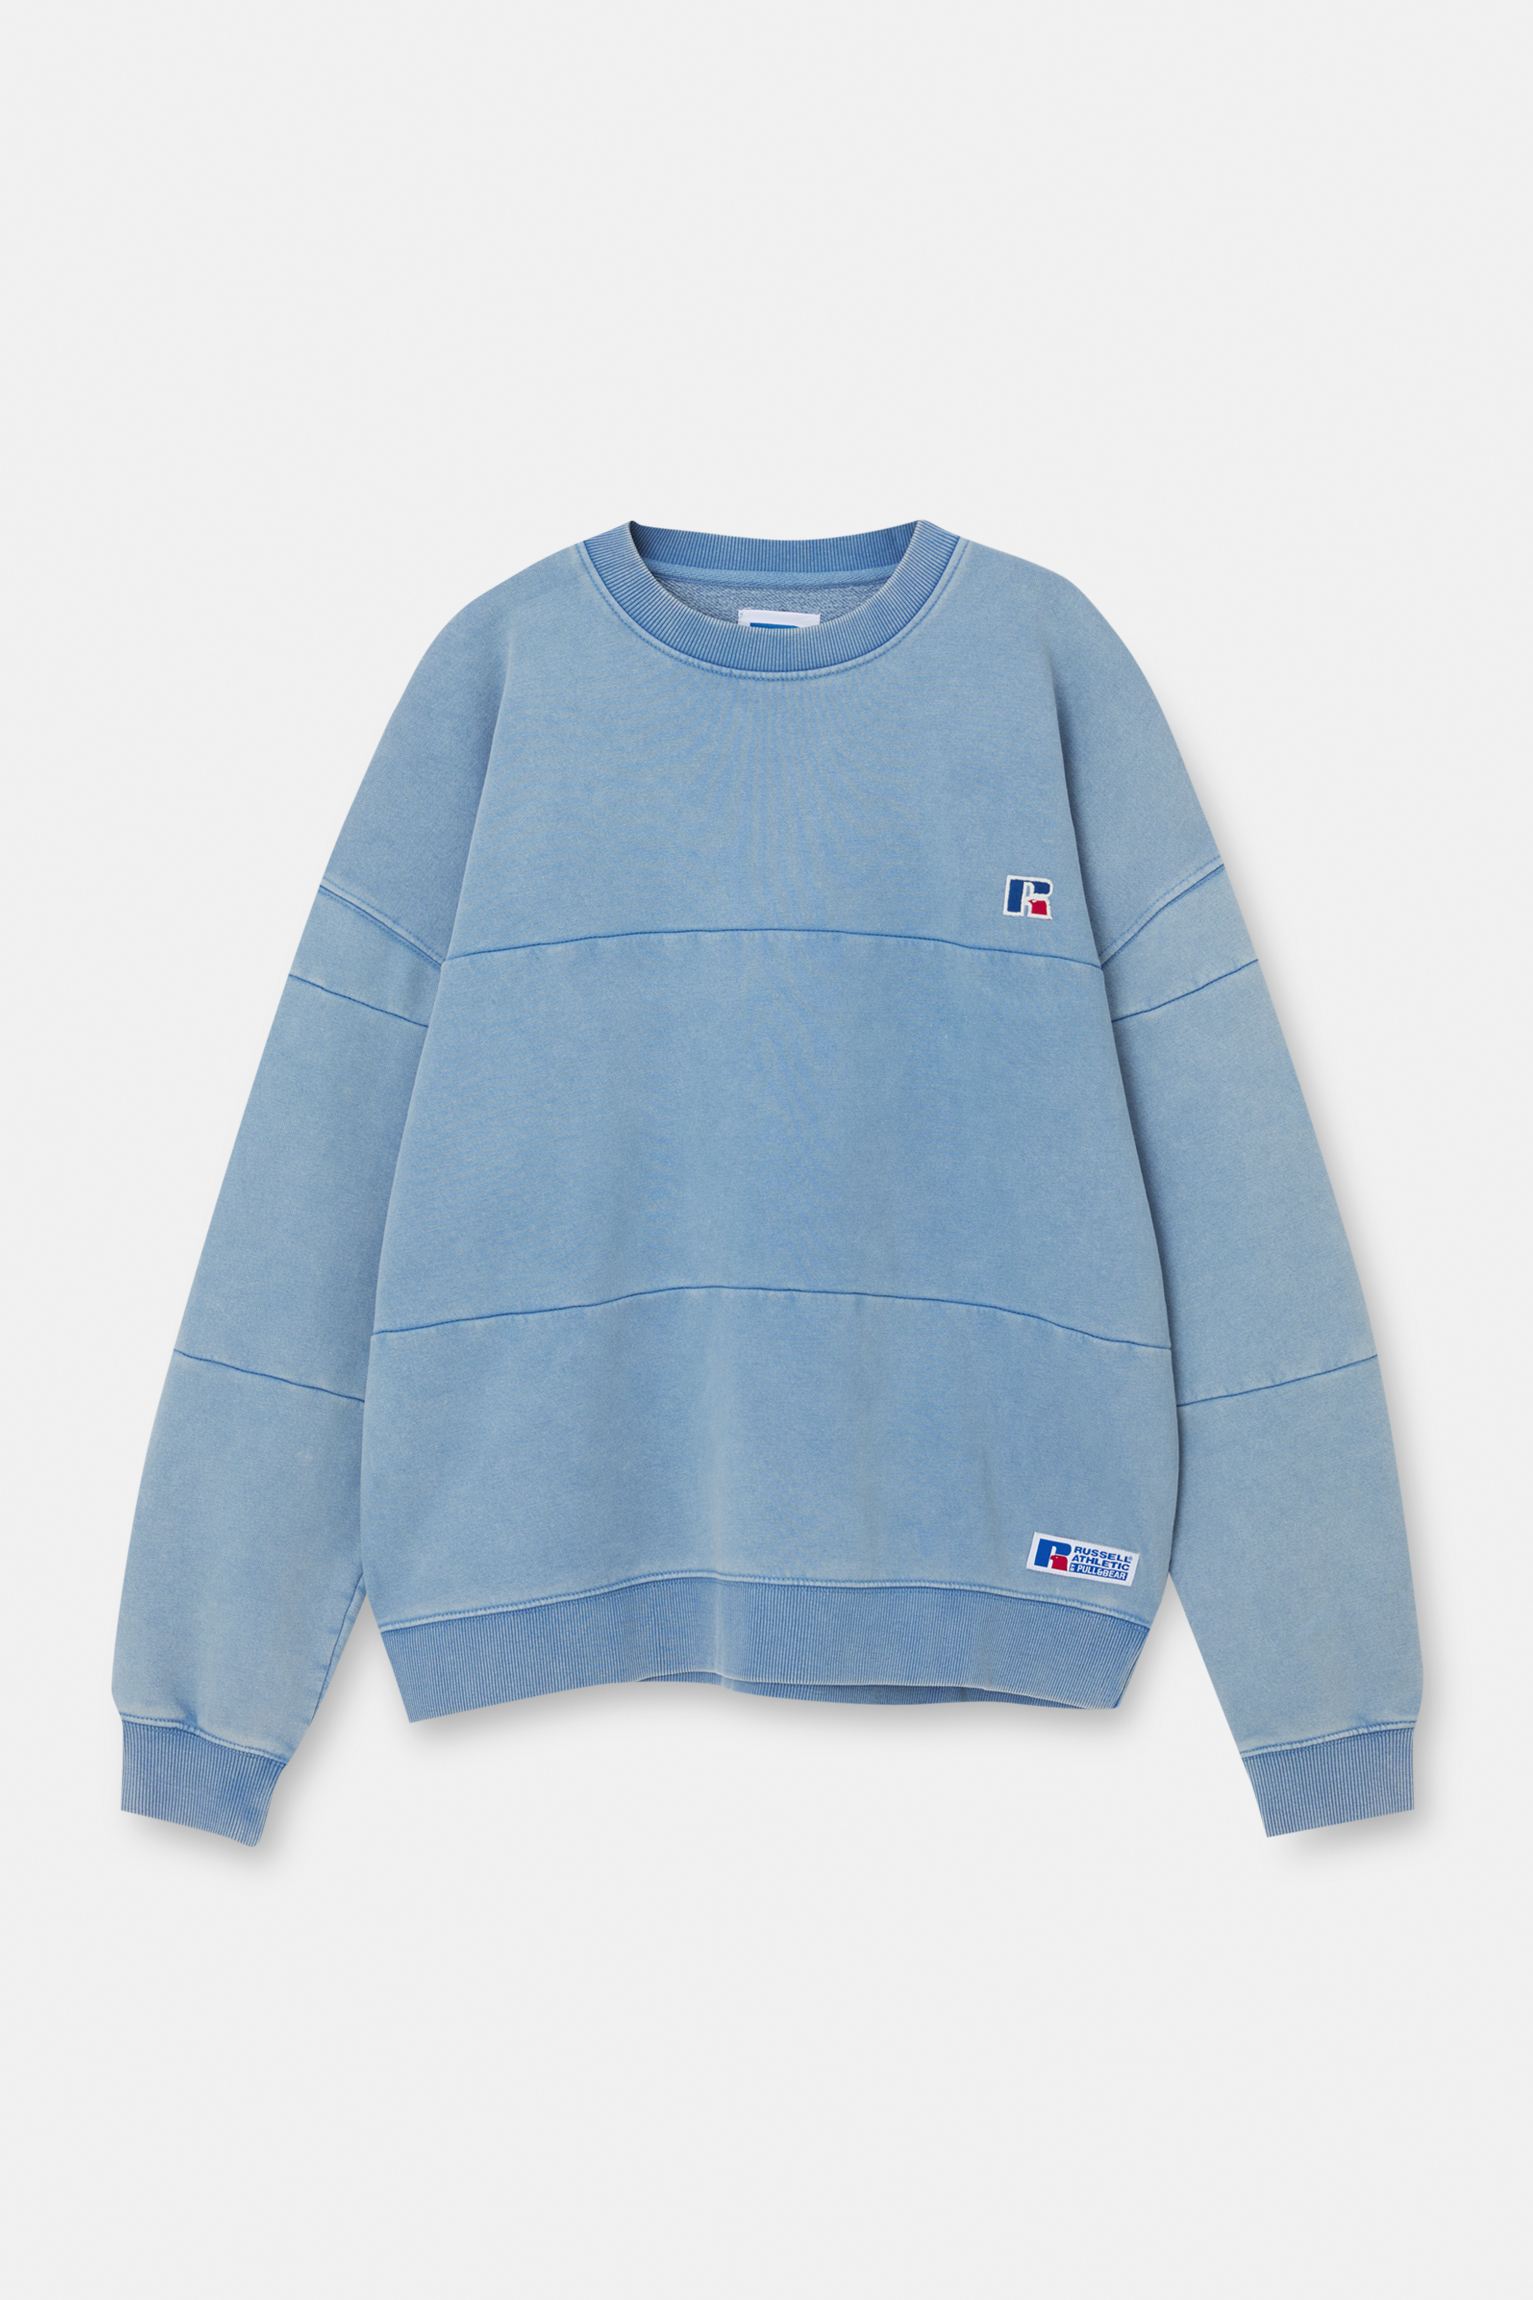 Russell Athletic by P&B faded sweatshirt - PULL&BEAR